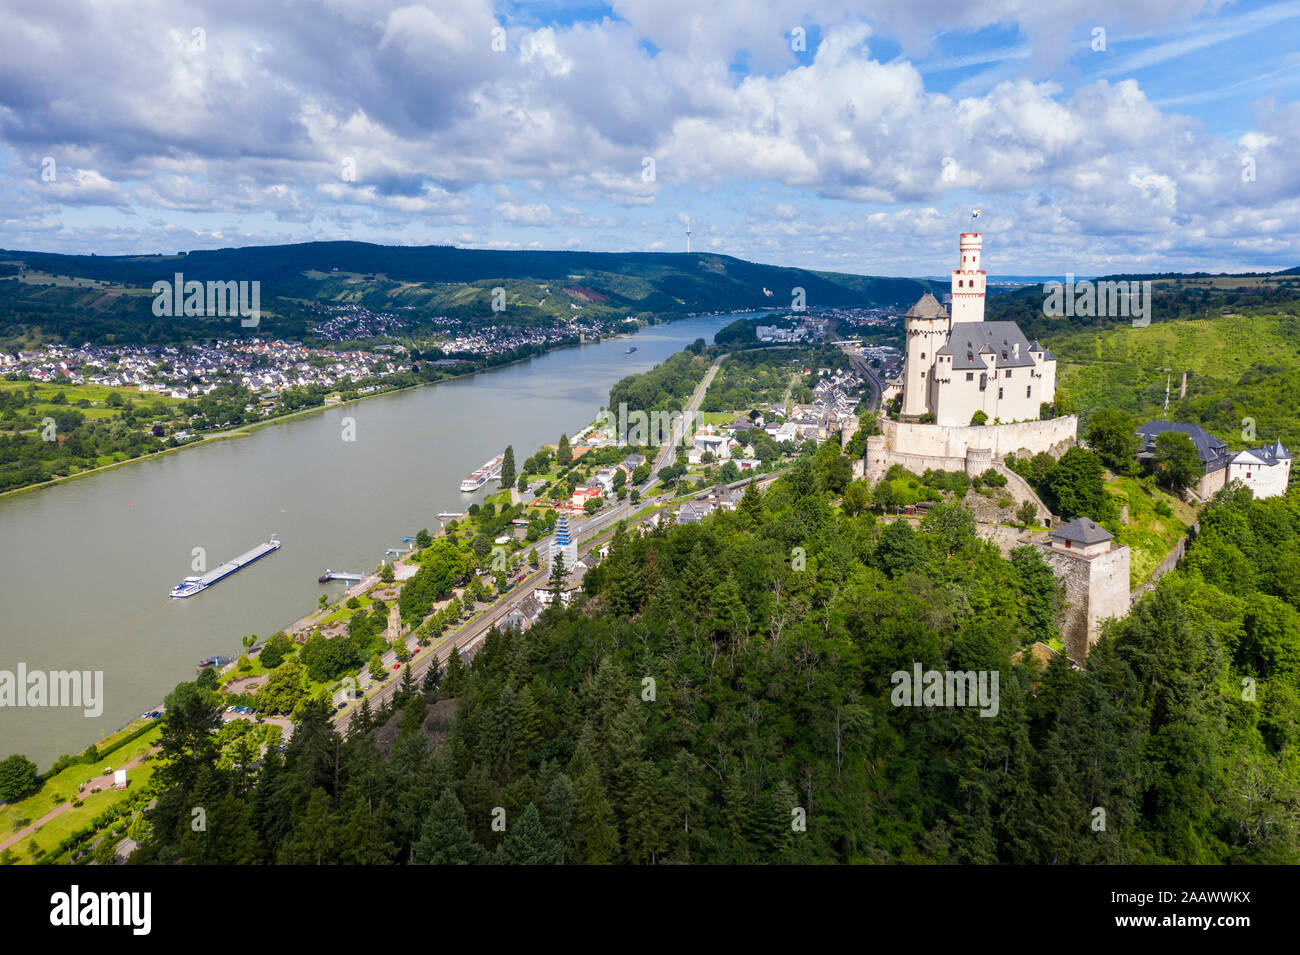 Aerial view of Marksburg on mountain against cloudy sky, Middle Rhine, Germany Stock Photo